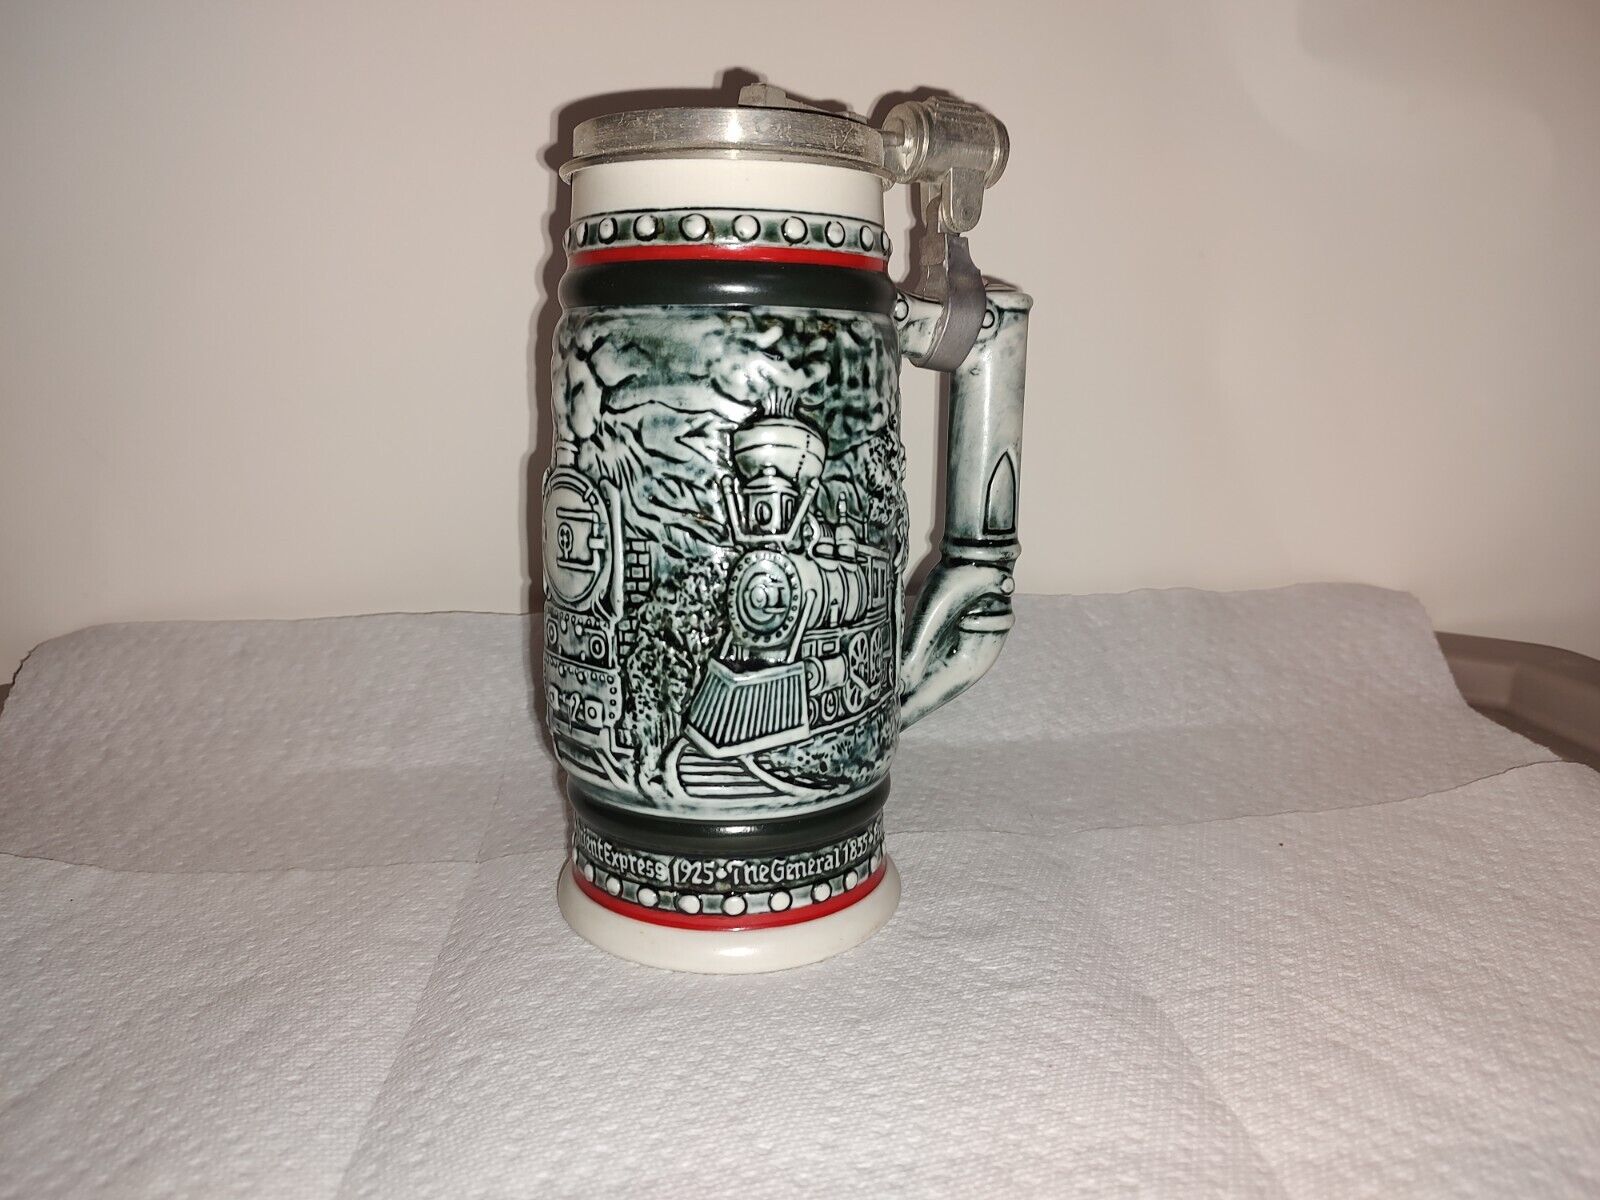 Vintage Avon Beer Stein- Age of the Iron Horse- Handcrafted in Brazil 1982 - NEW